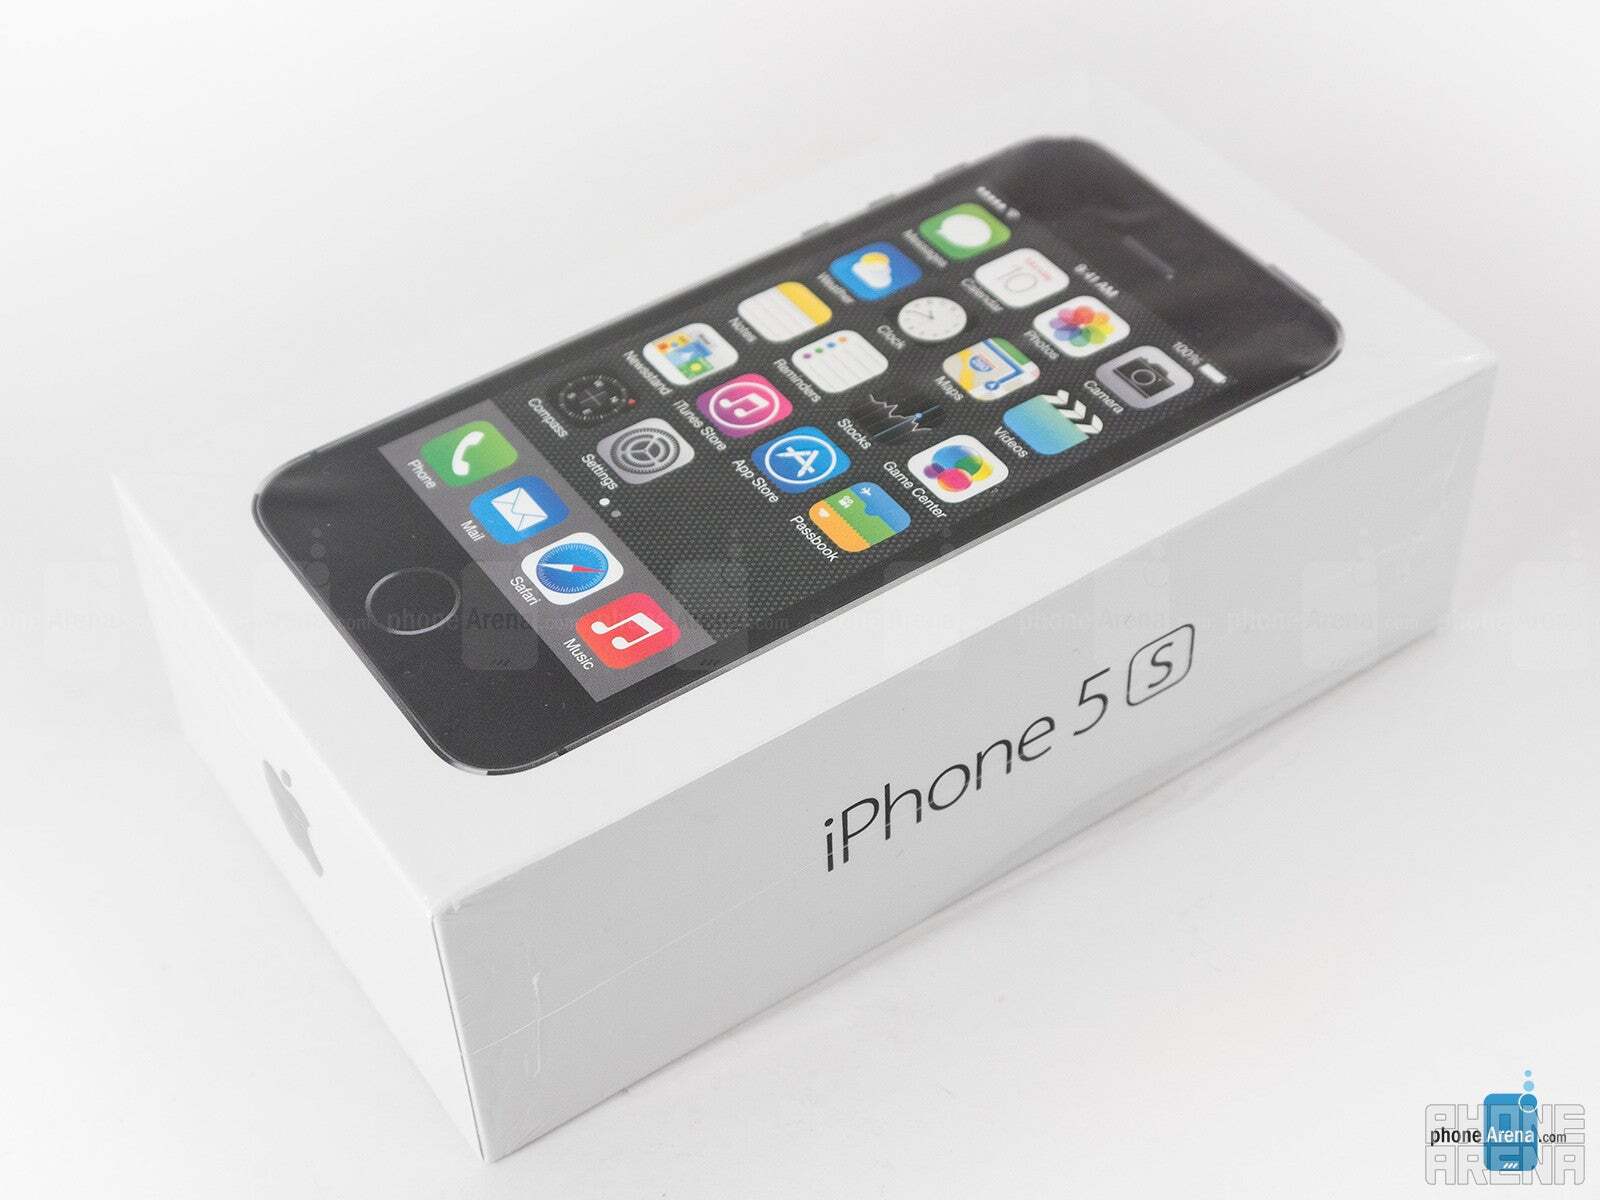 The iPhone 5s is now officially obsolete - Apple says that this iPhone model is officially obsolete